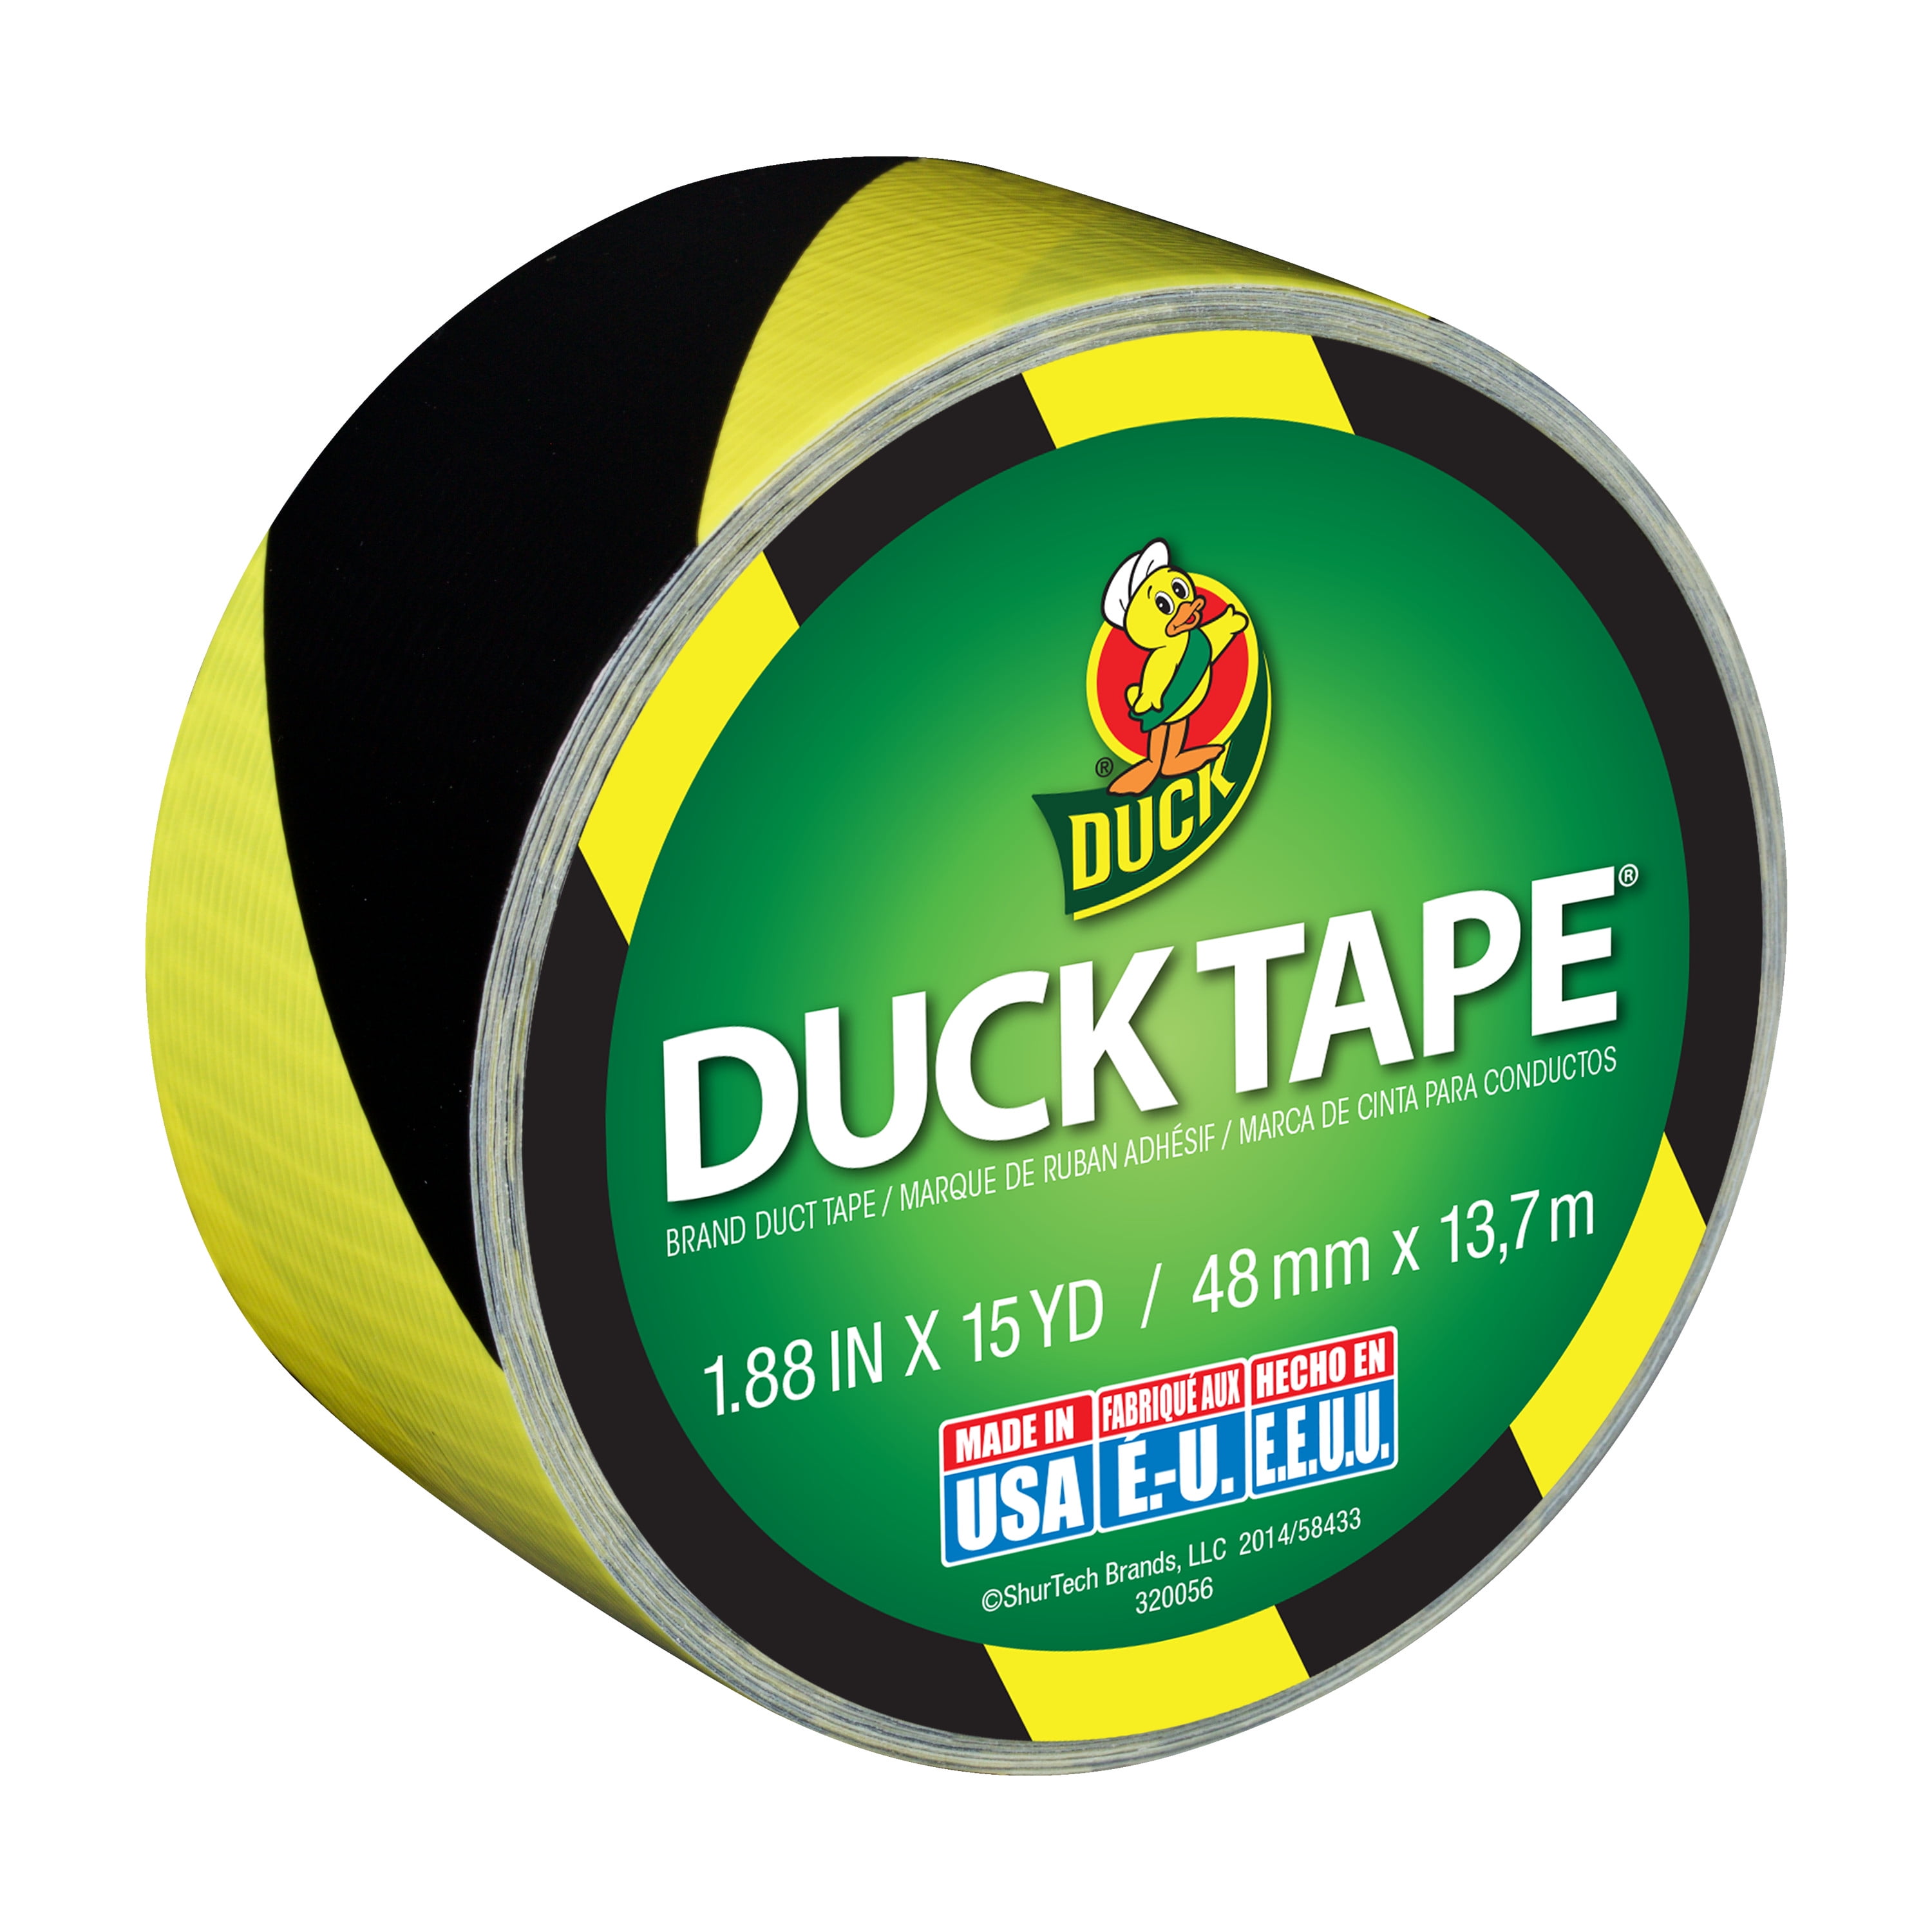 x 10 Yd X 9 mil Diamond Plate Printed Duct Tape 283981 6 Pk Duck Tape 1.88 In 